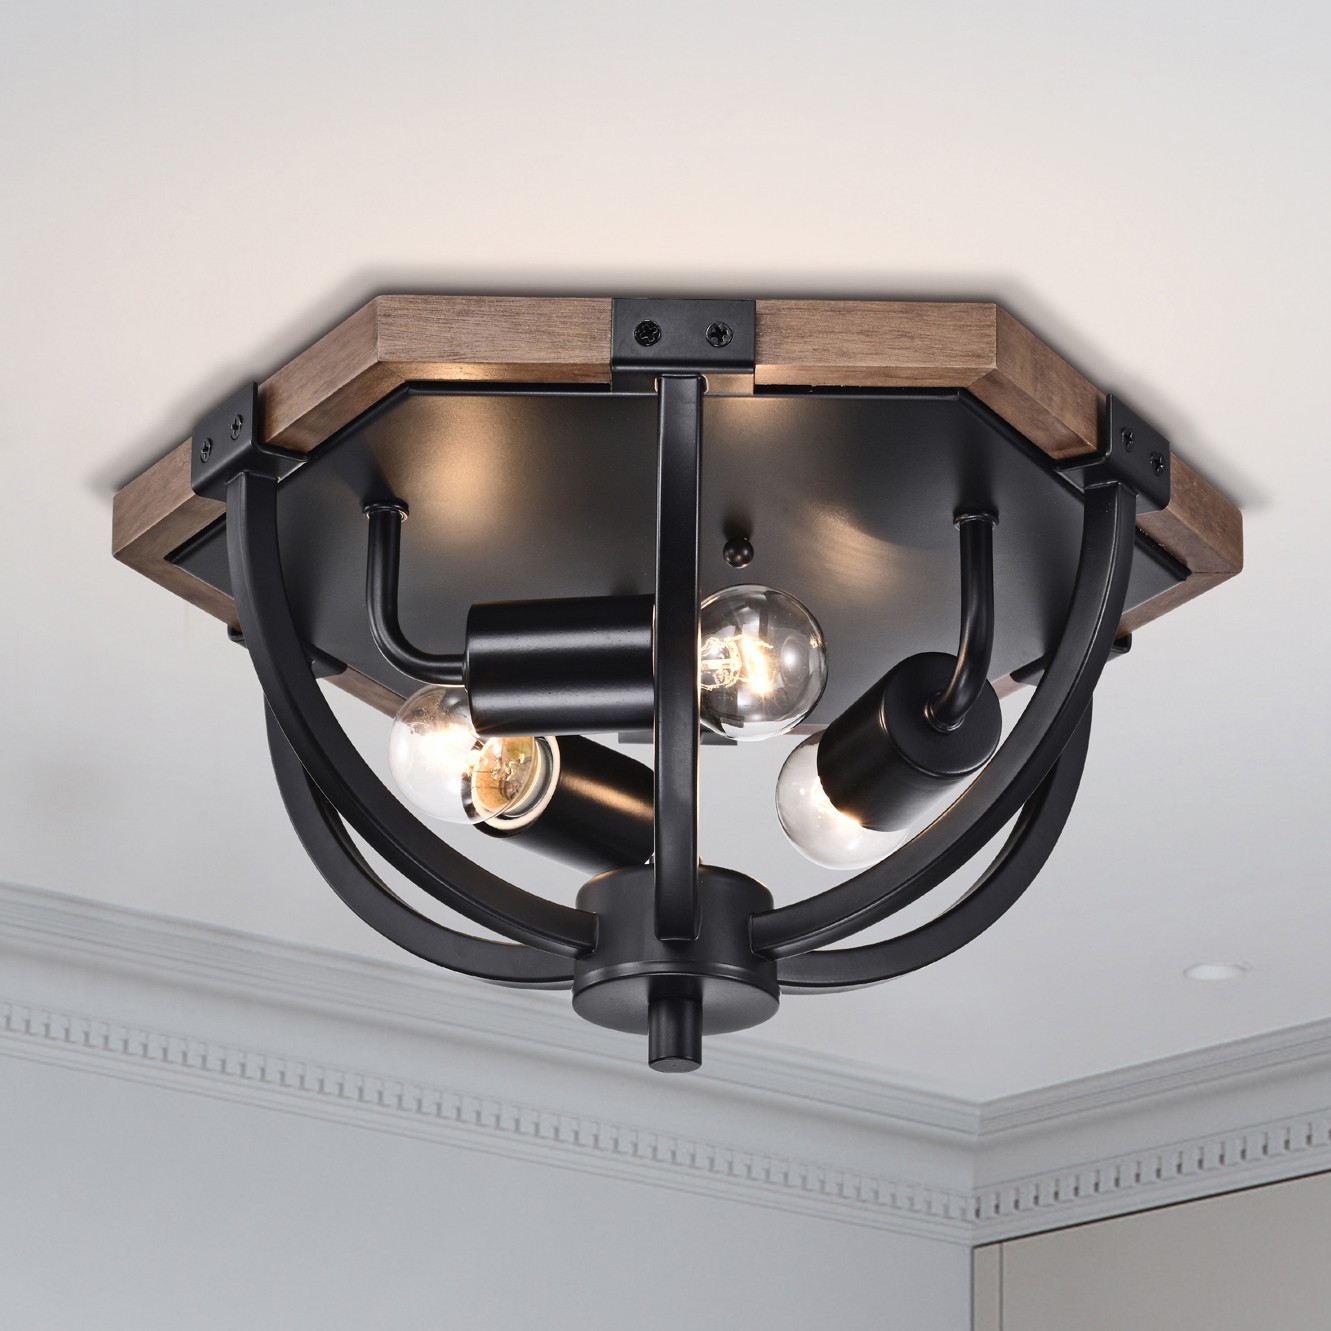 Fiona 12 in. 3-Light Indoor Matte Black and Faux Wood Grain Finish Flush Mount with Light Kit